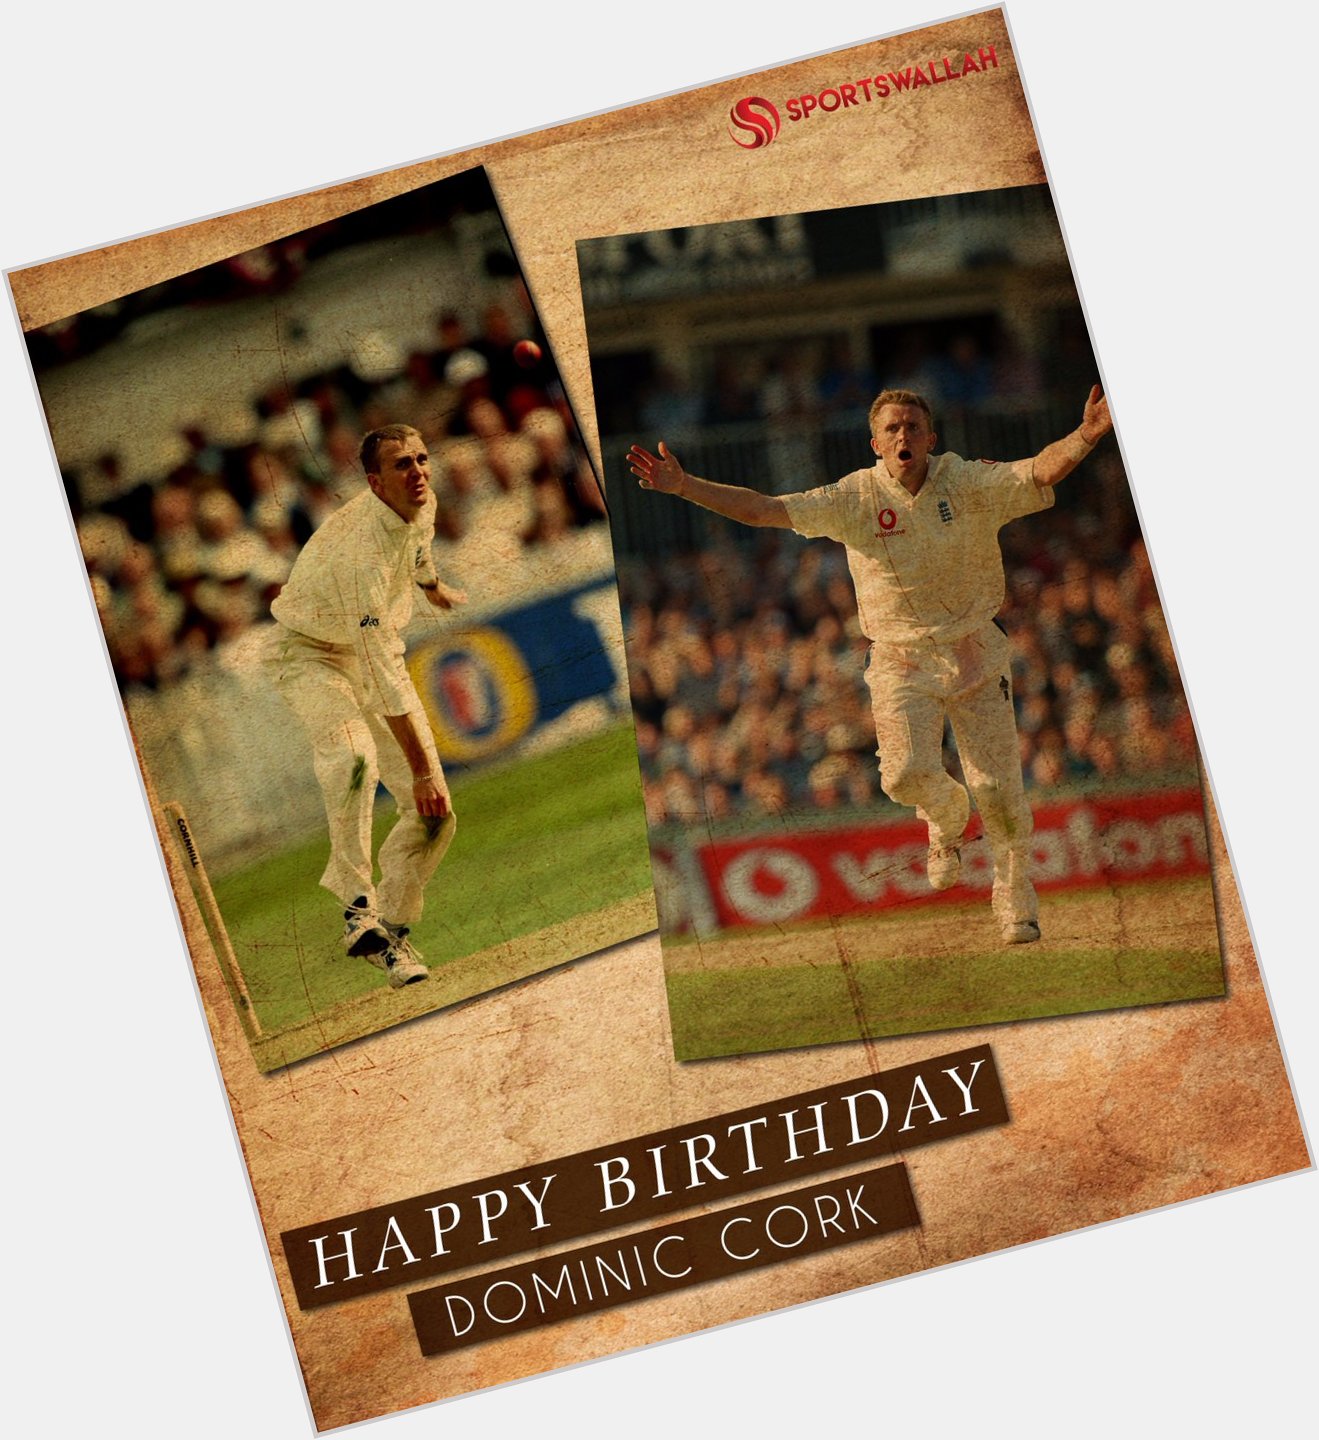 131 wickets in 37 Tests, 41 wickets from 32 ODIs. Happy Birthday to former England fast bowler, Dominic Cork 